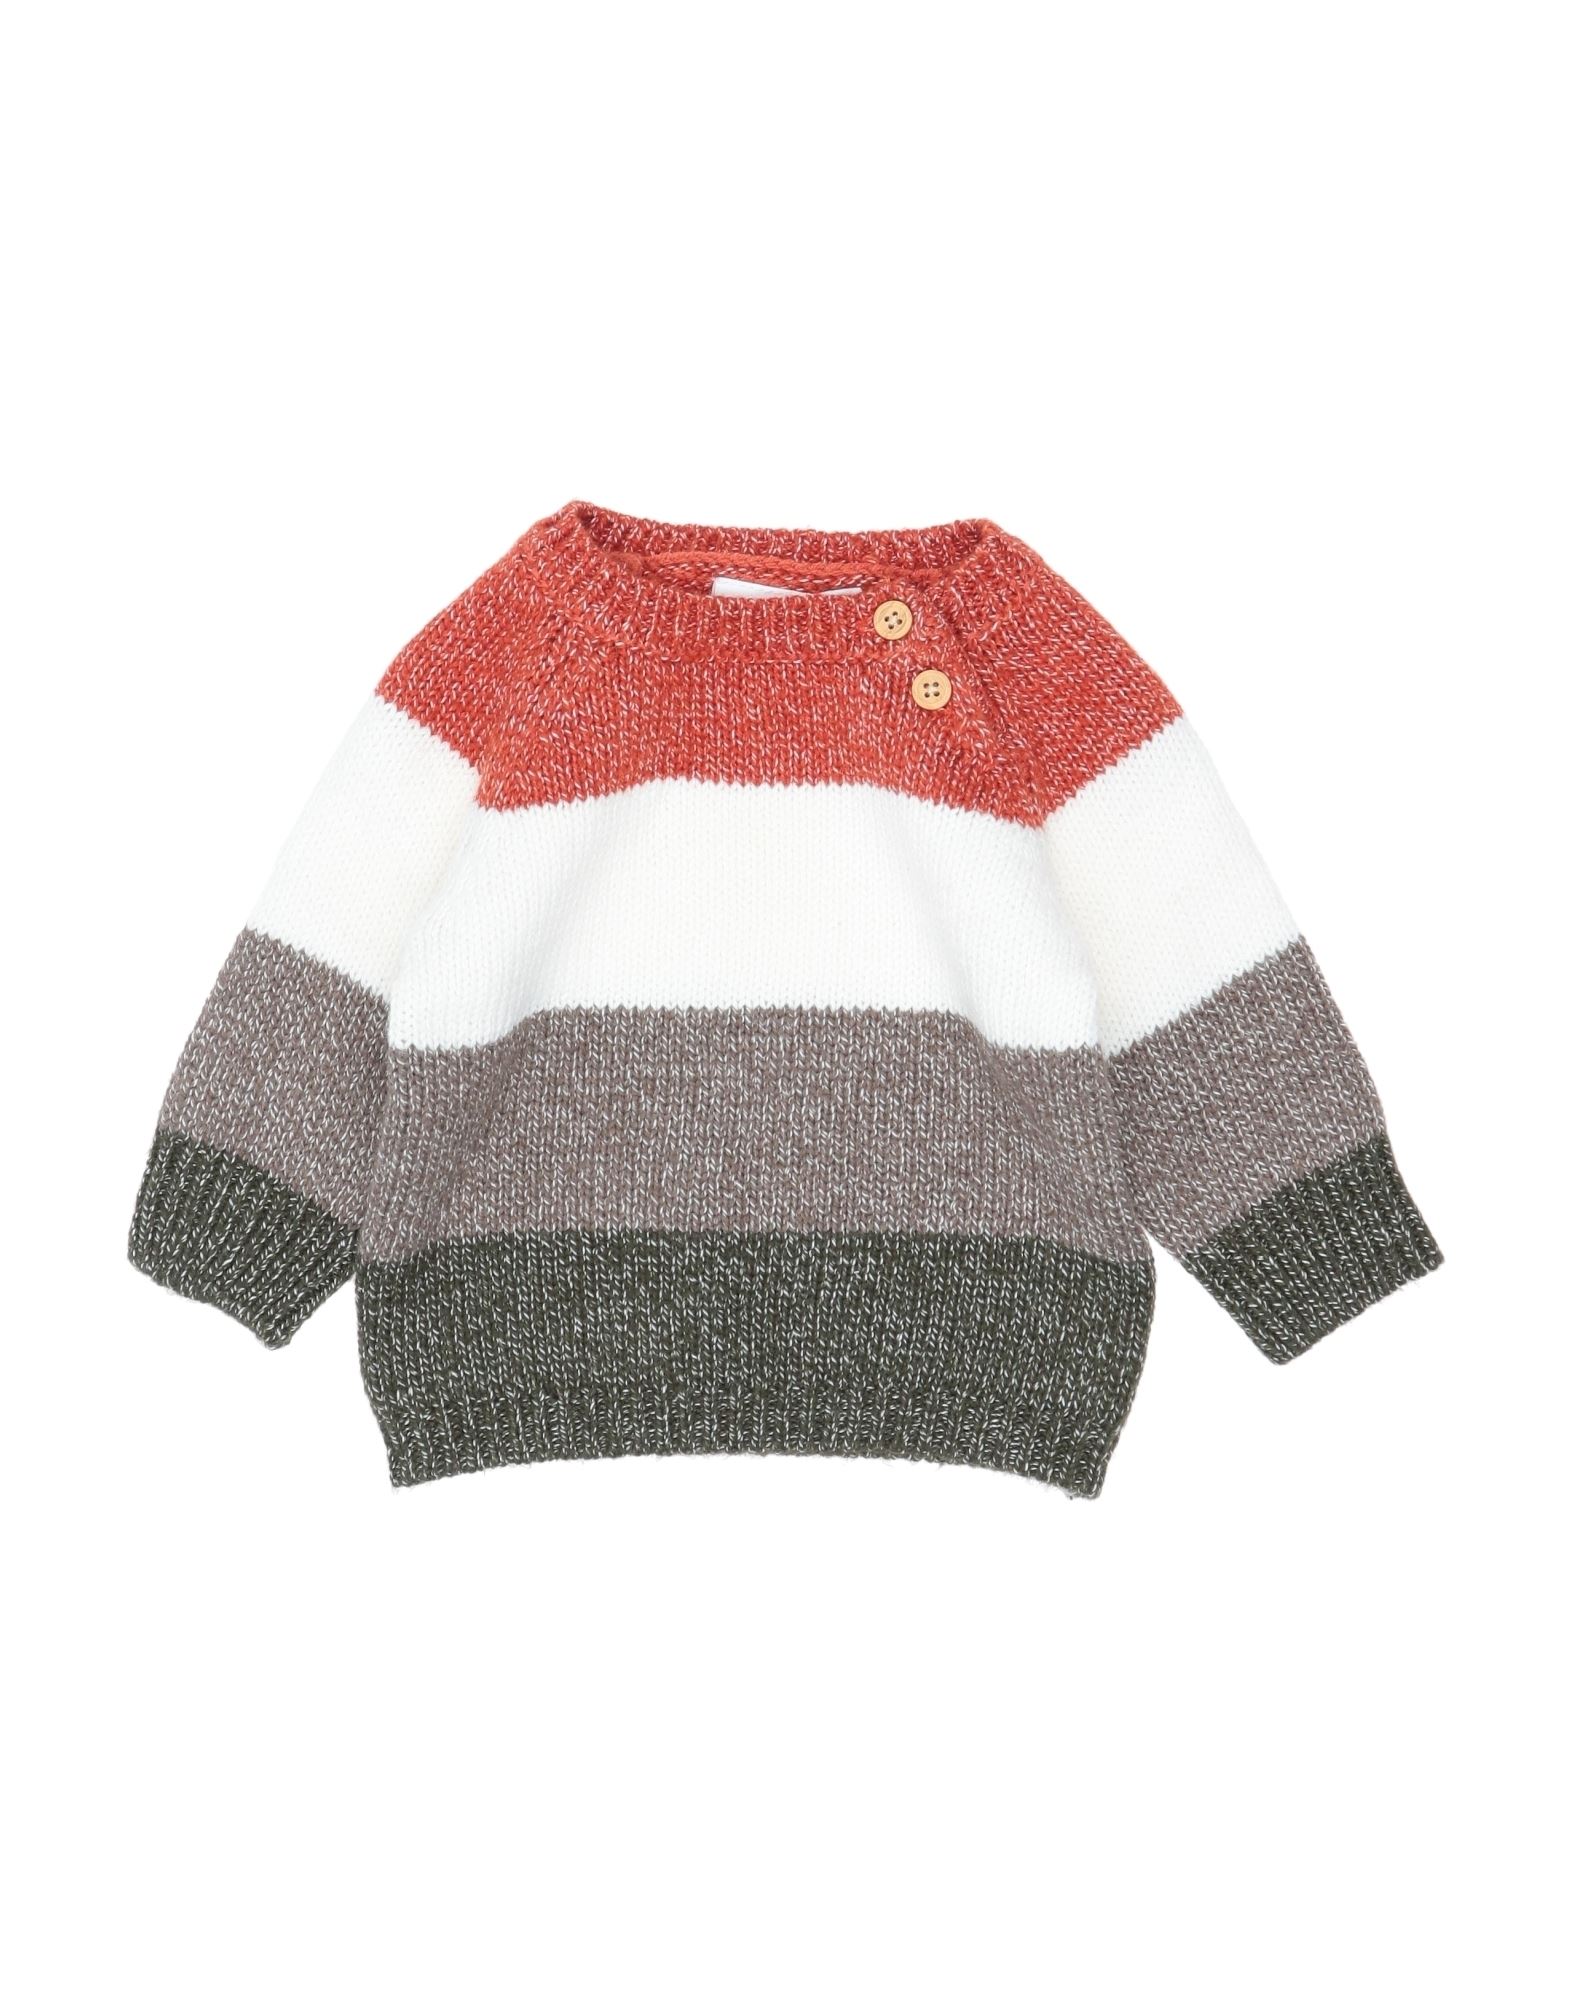 NAME IT® Pullover Kinder Rostrot von NAME IT®